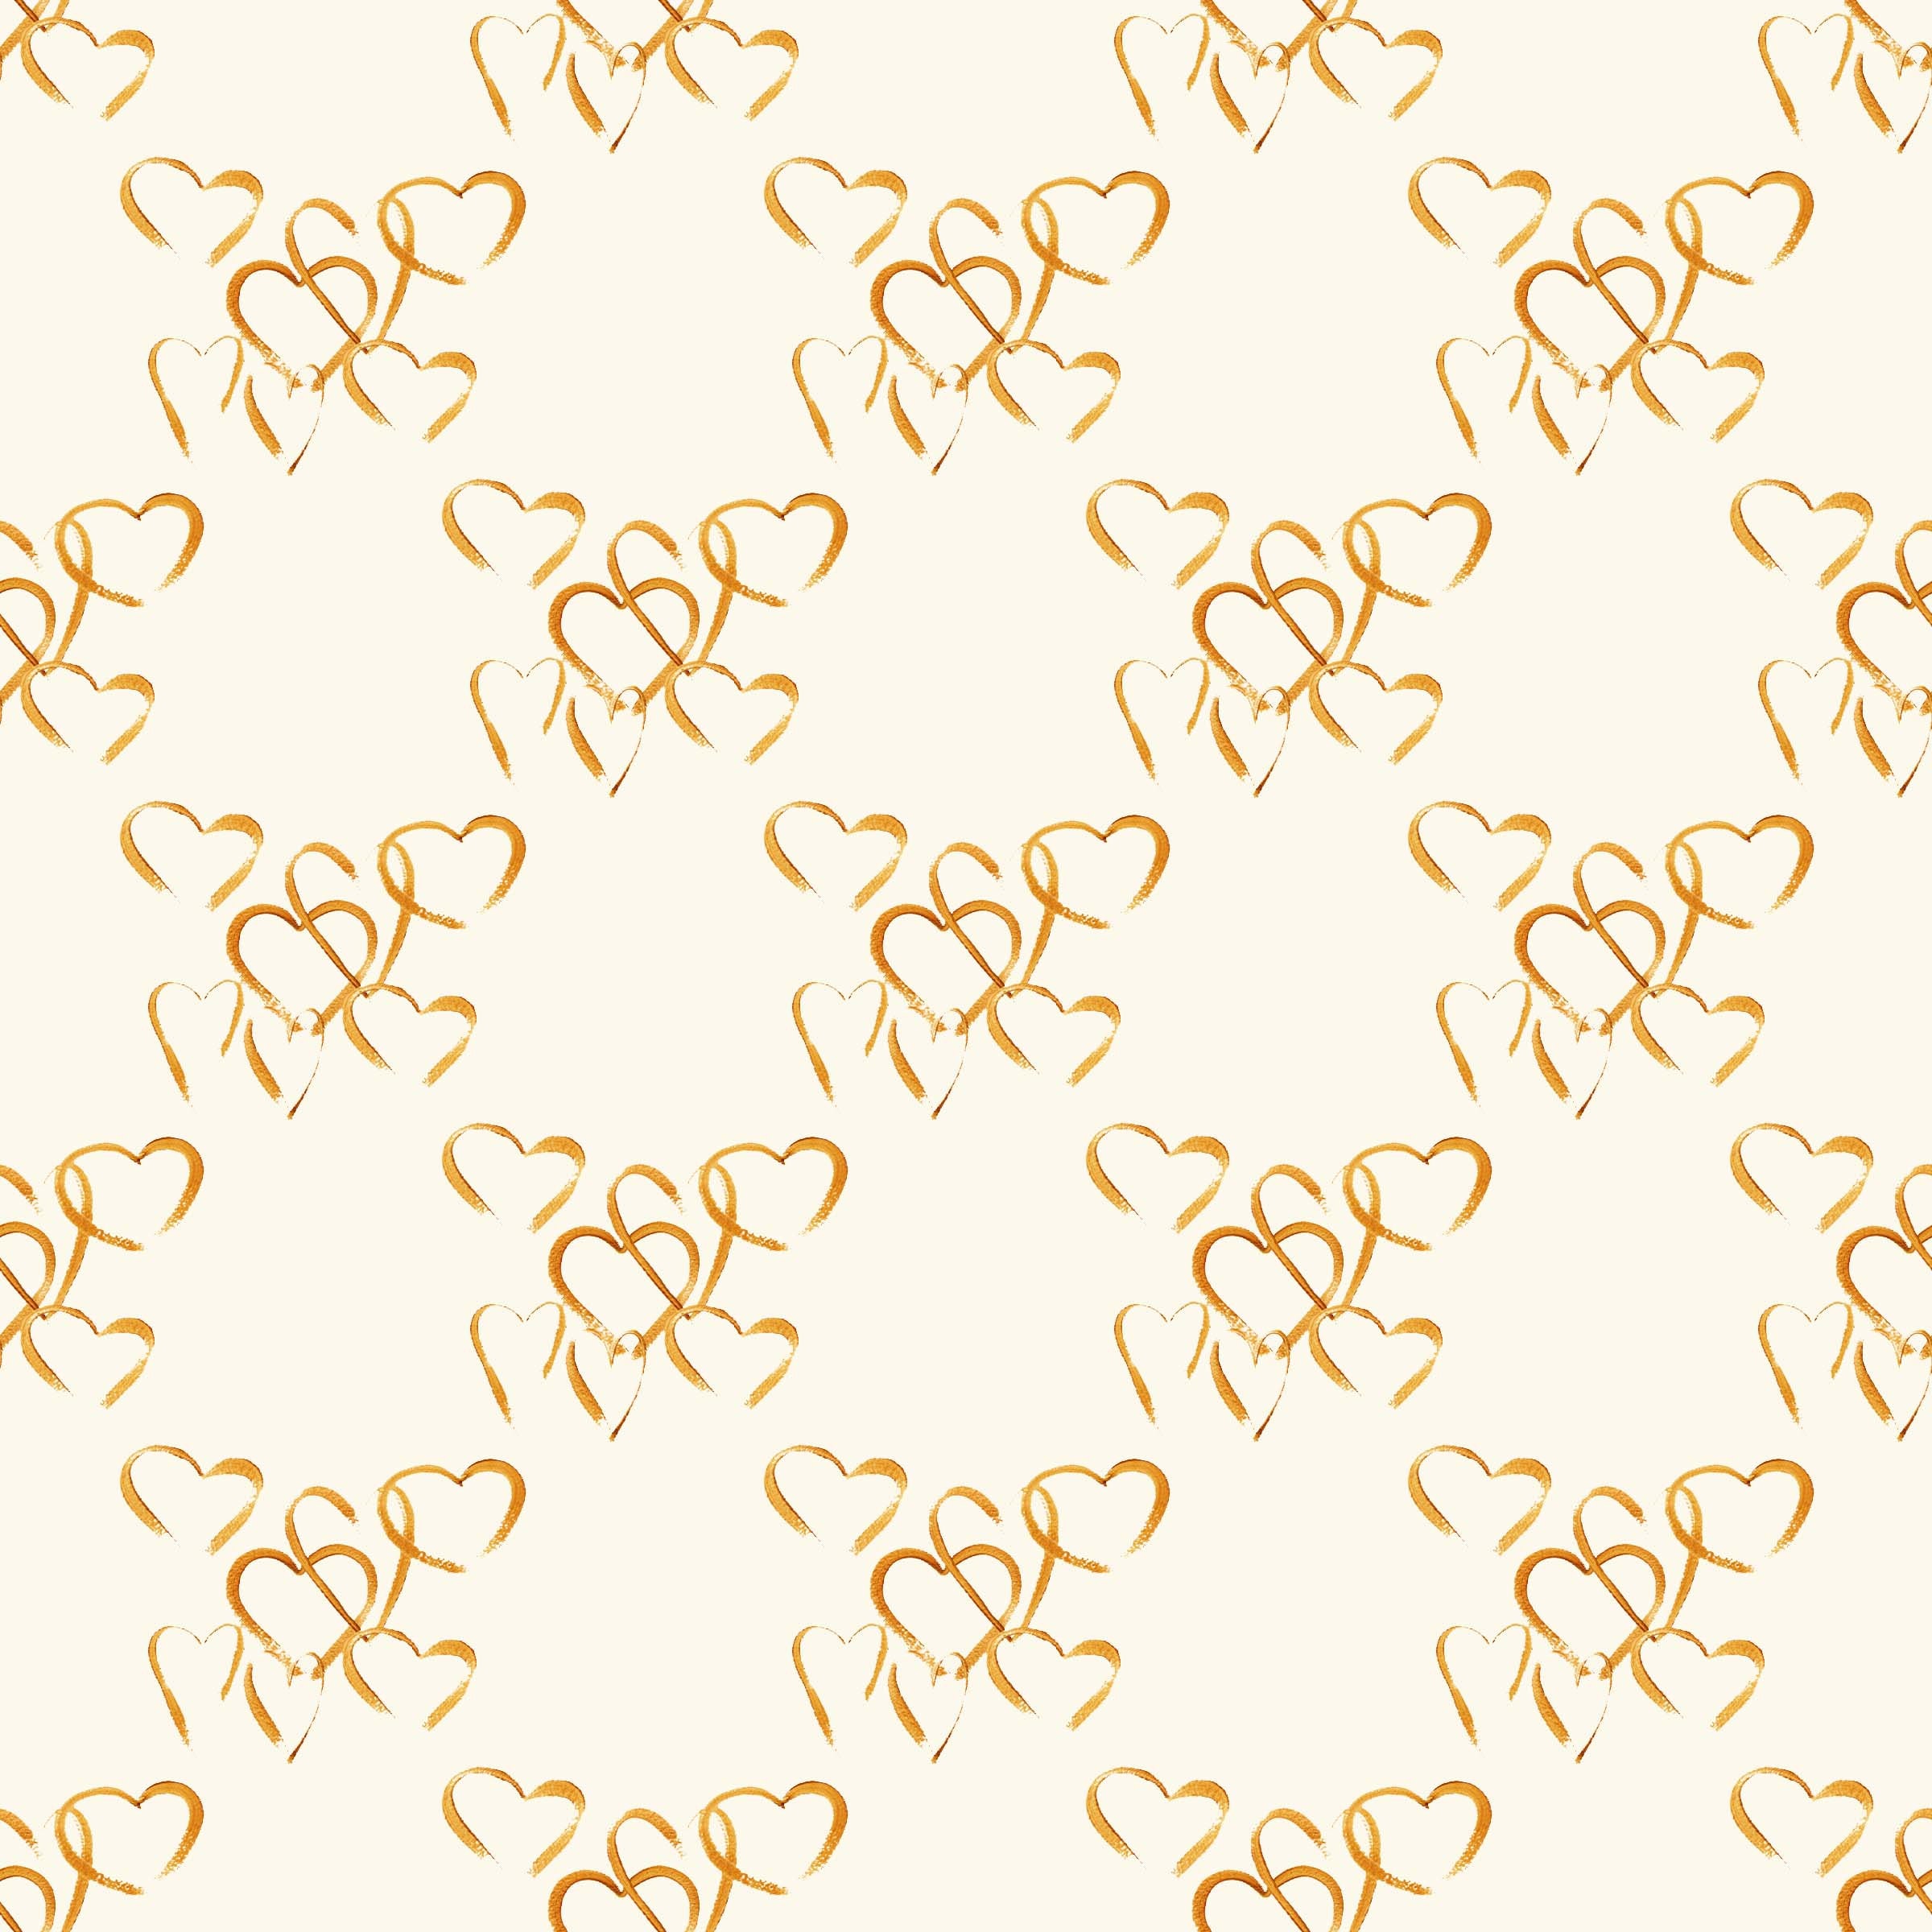 Gorgeous Golden Hearts - Luxury Wrapping Paper - Ideal for Wedding Gifts